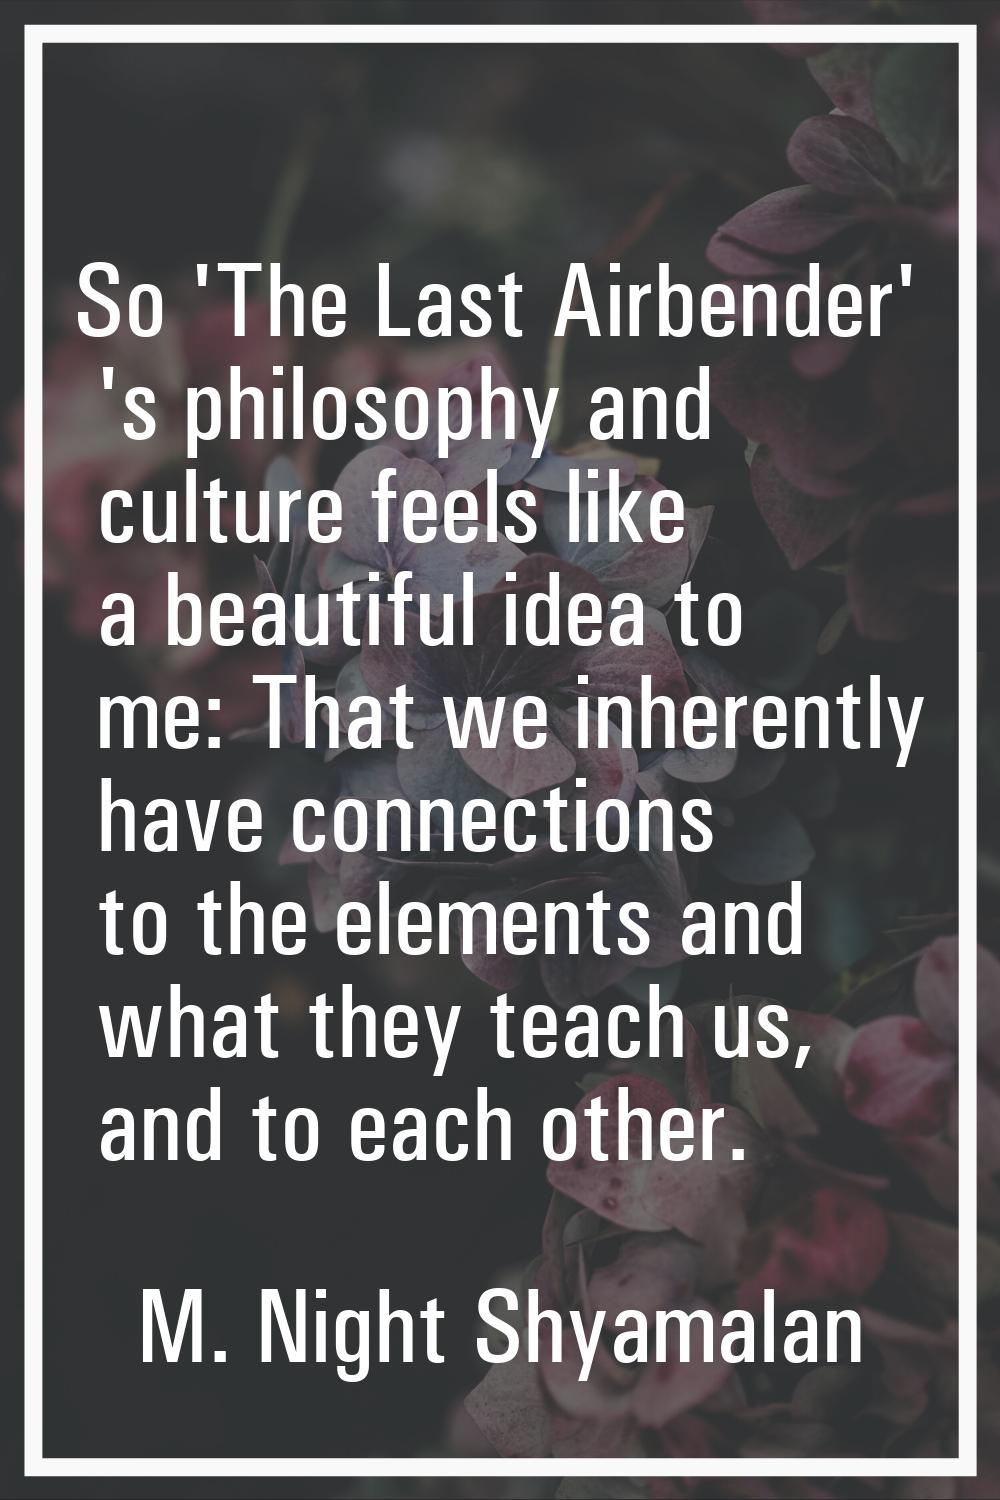 So 'The Last Airbender' 's philosophy and culture feels like a beautiful idea to me: That we inhere